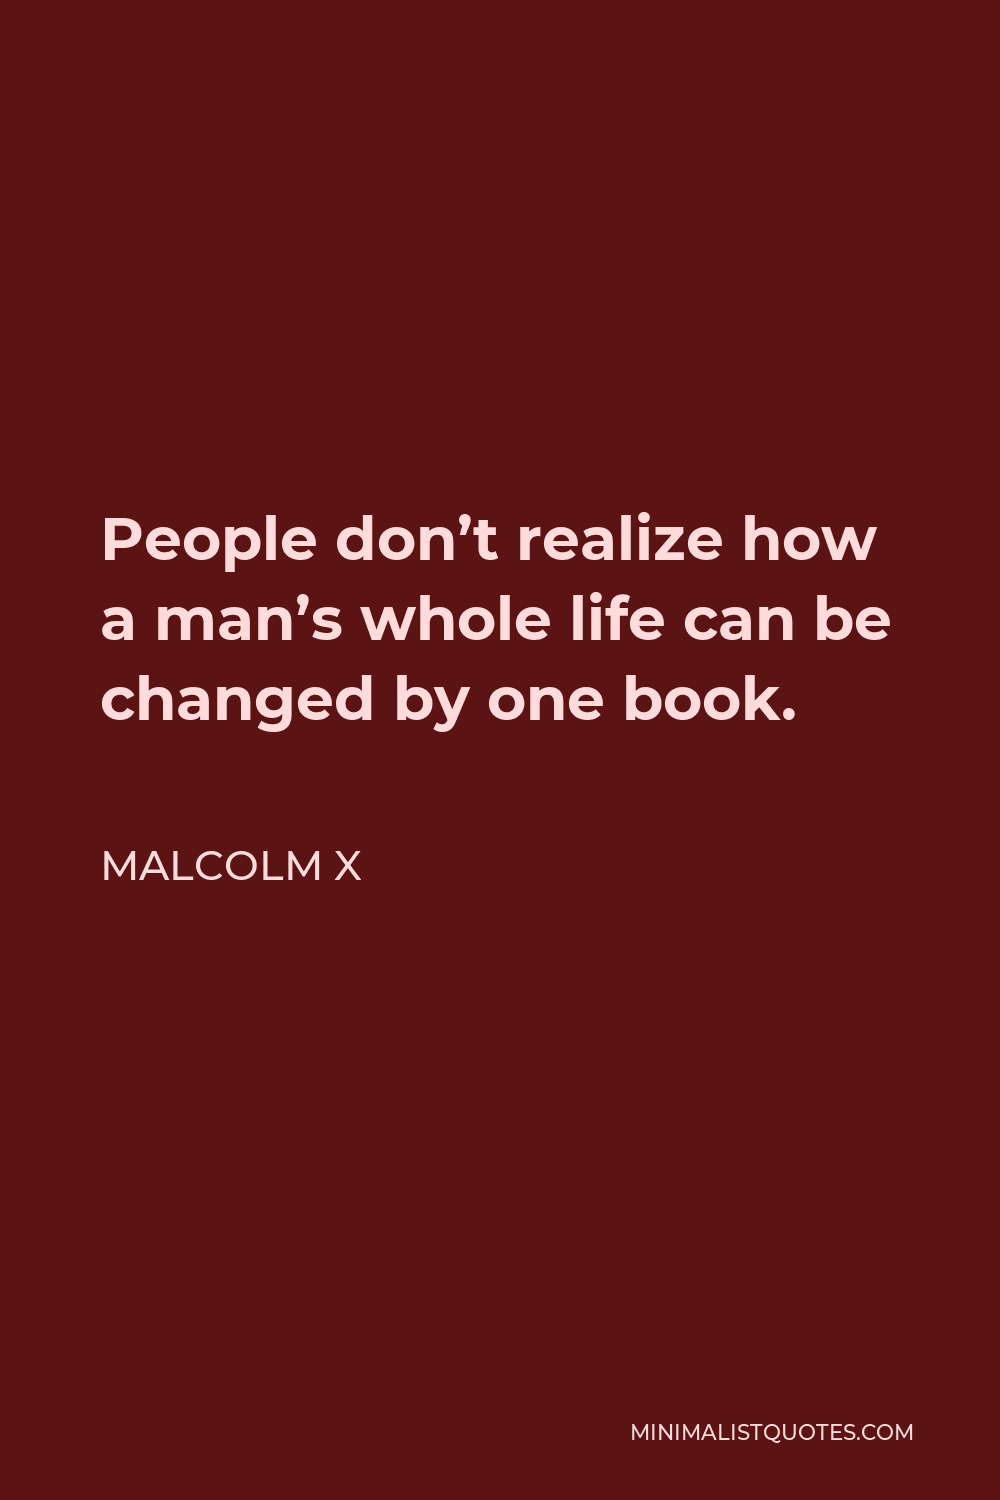 Malcolm X Quote - People don’t realize how a man’s whole life can be changed by one book.